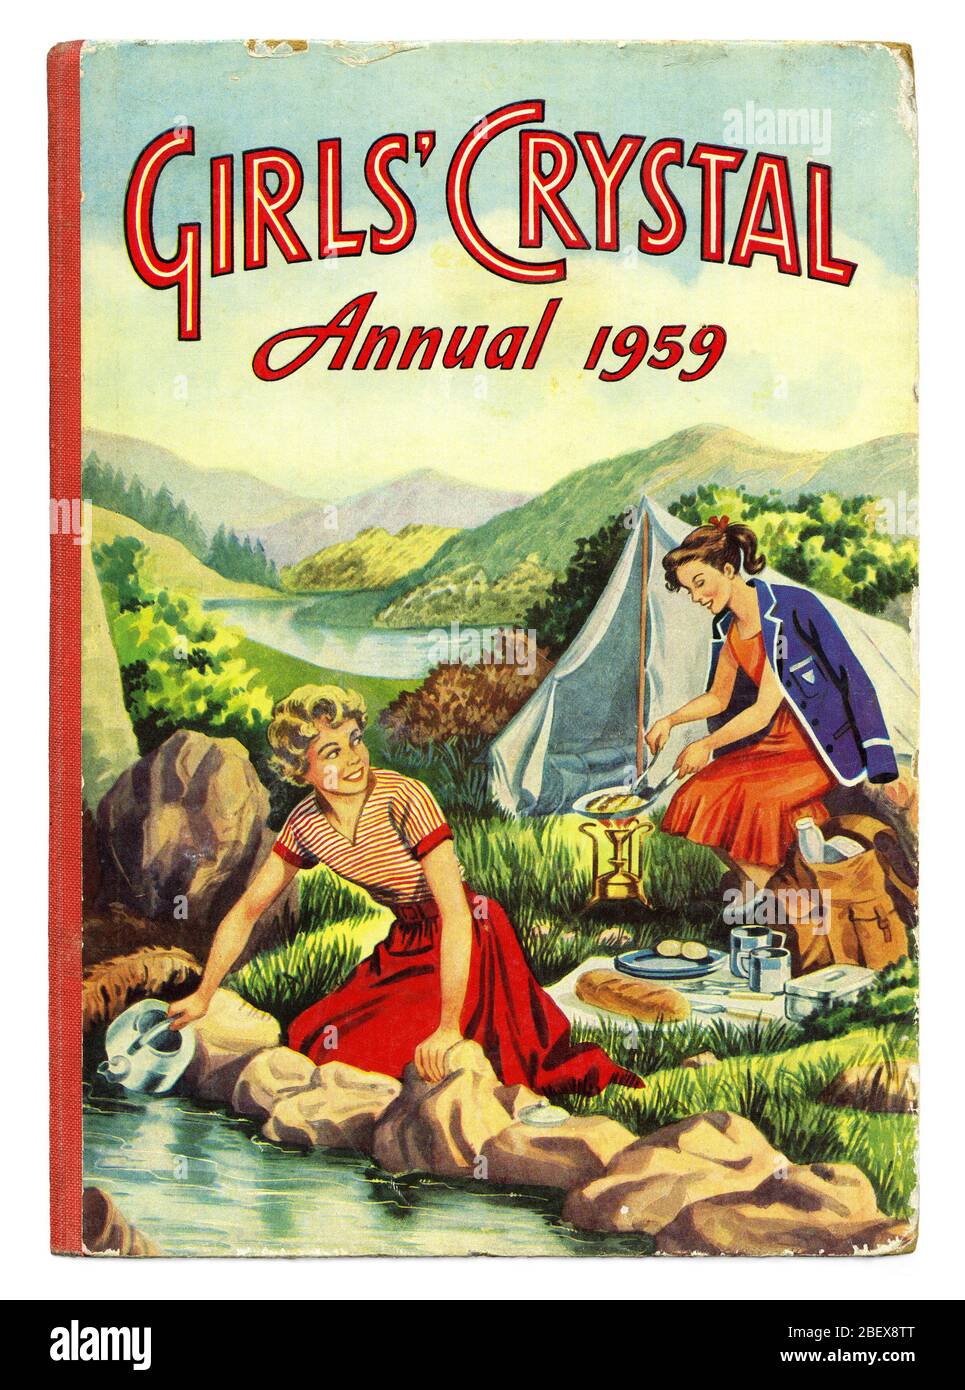 Cover of the Girls’ Crystal Annual 1959 published by The Amalgamated Press, London, England, UK. Annuals such as this were often the staple Christmas present of a British post-war childhood. Girls’ Crystal Annual featured two girls camping in an idyllic setting. They both wear dresses rather than more practical outdoor clothing. One girl is even wearing her school blazer whilst frying bacon on a camping stove and the other girl gets water in a kettle from a stream. Posh public (private) school children tended to feature in books of this era. Stock Photo